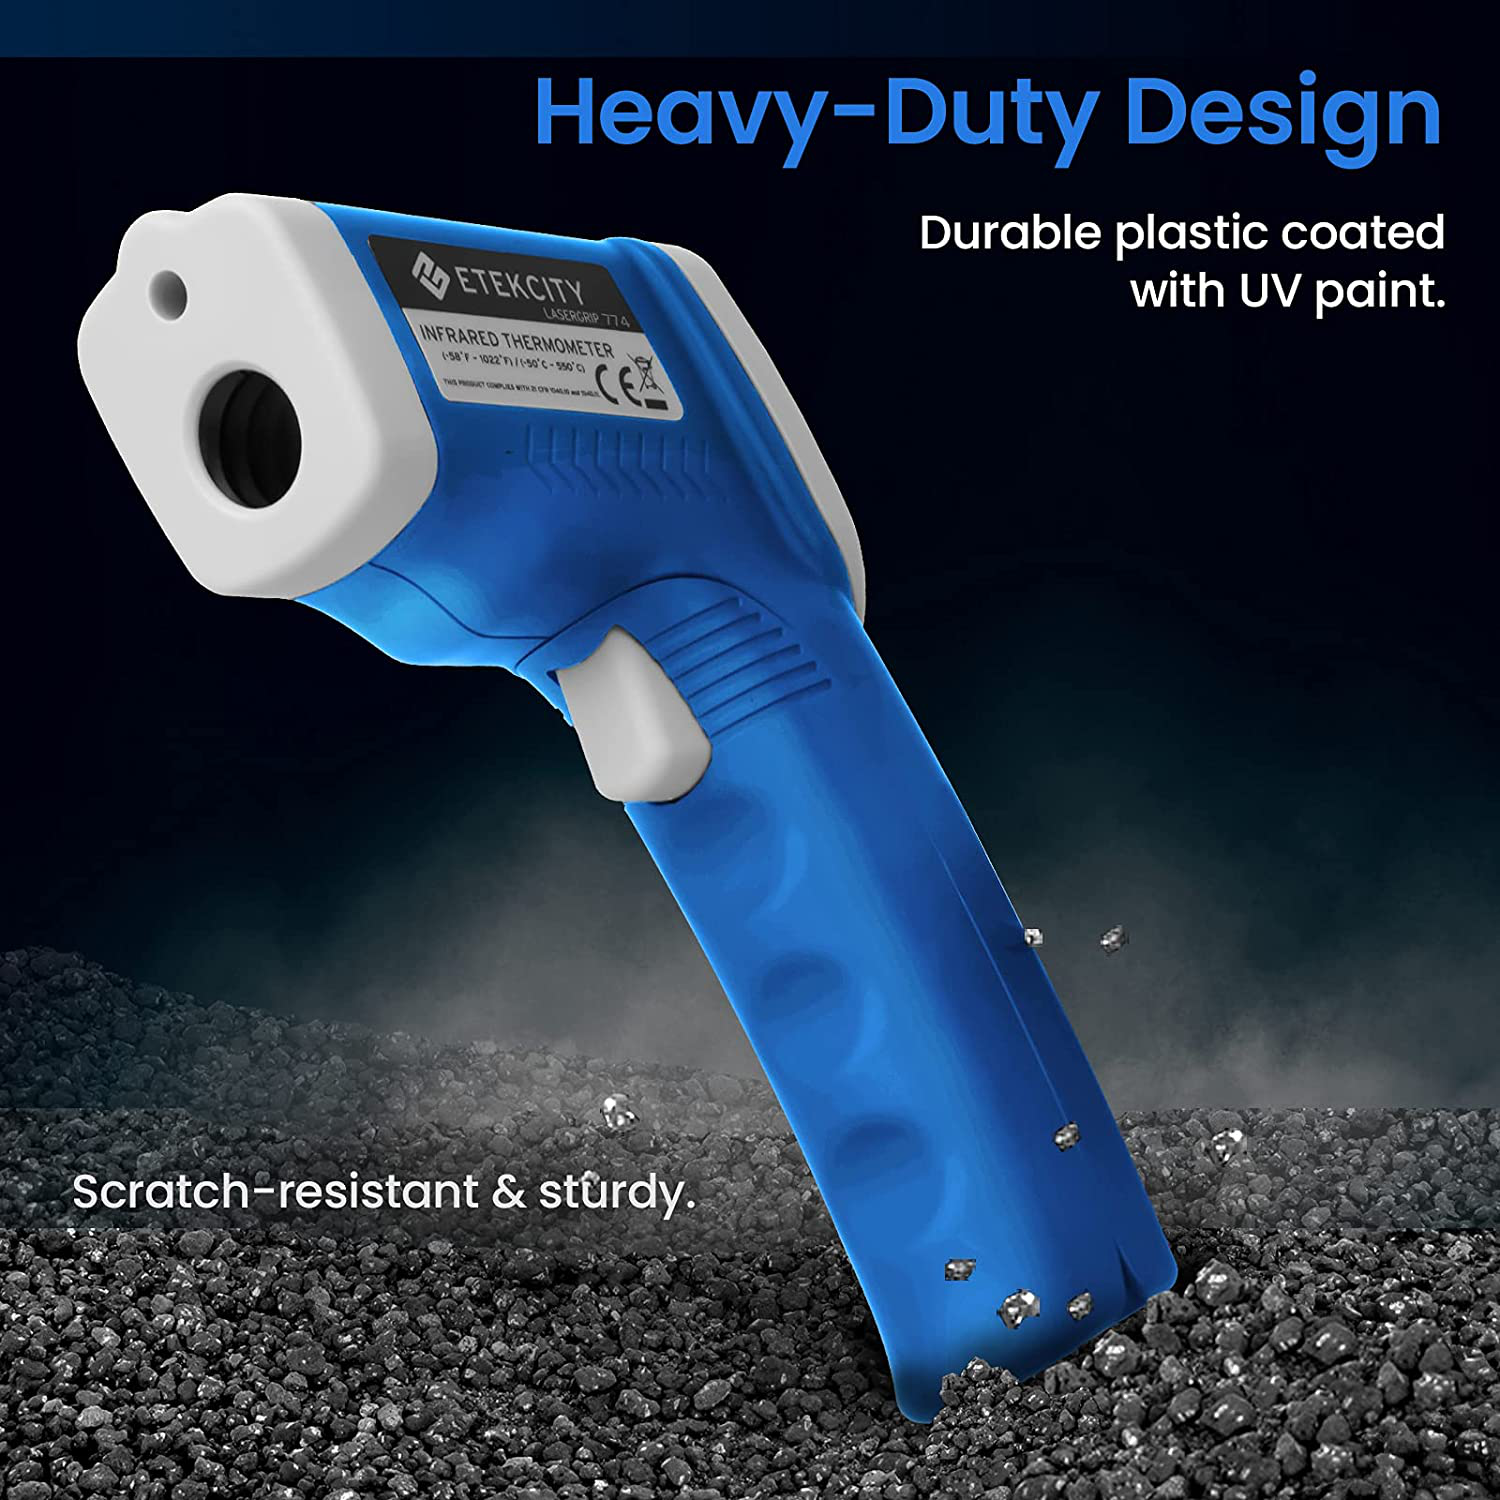 Etekcity Infrared Thermometer 774 (Not for Human) Temperature Gun Non-Contact Digital Laser Thermometer-58℉~ 716℉ (-50℃ ~ 380℃) Blue